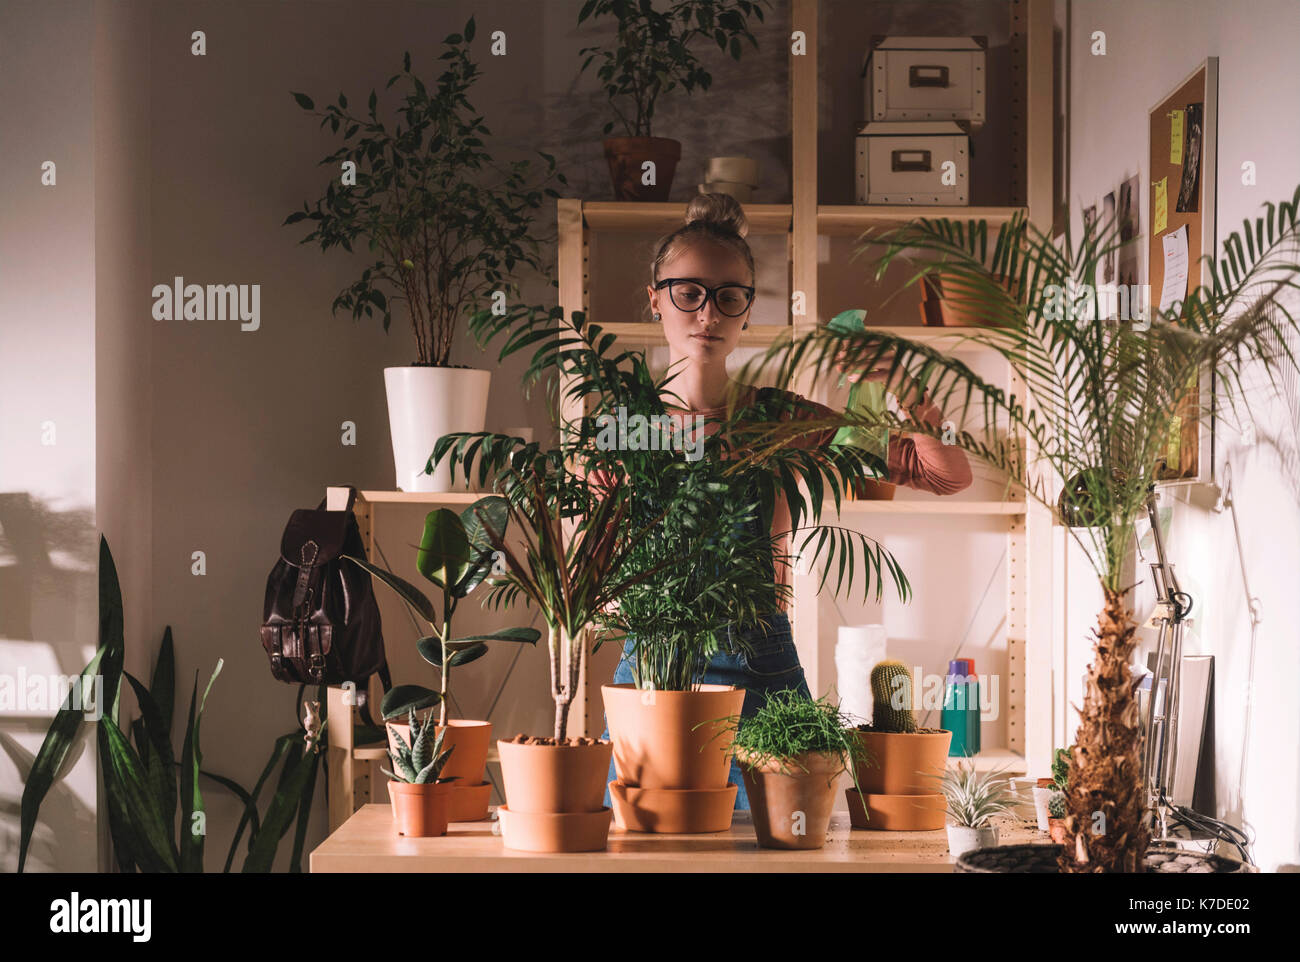 Woman watering potted plants using spray bottle at home Stock Photo